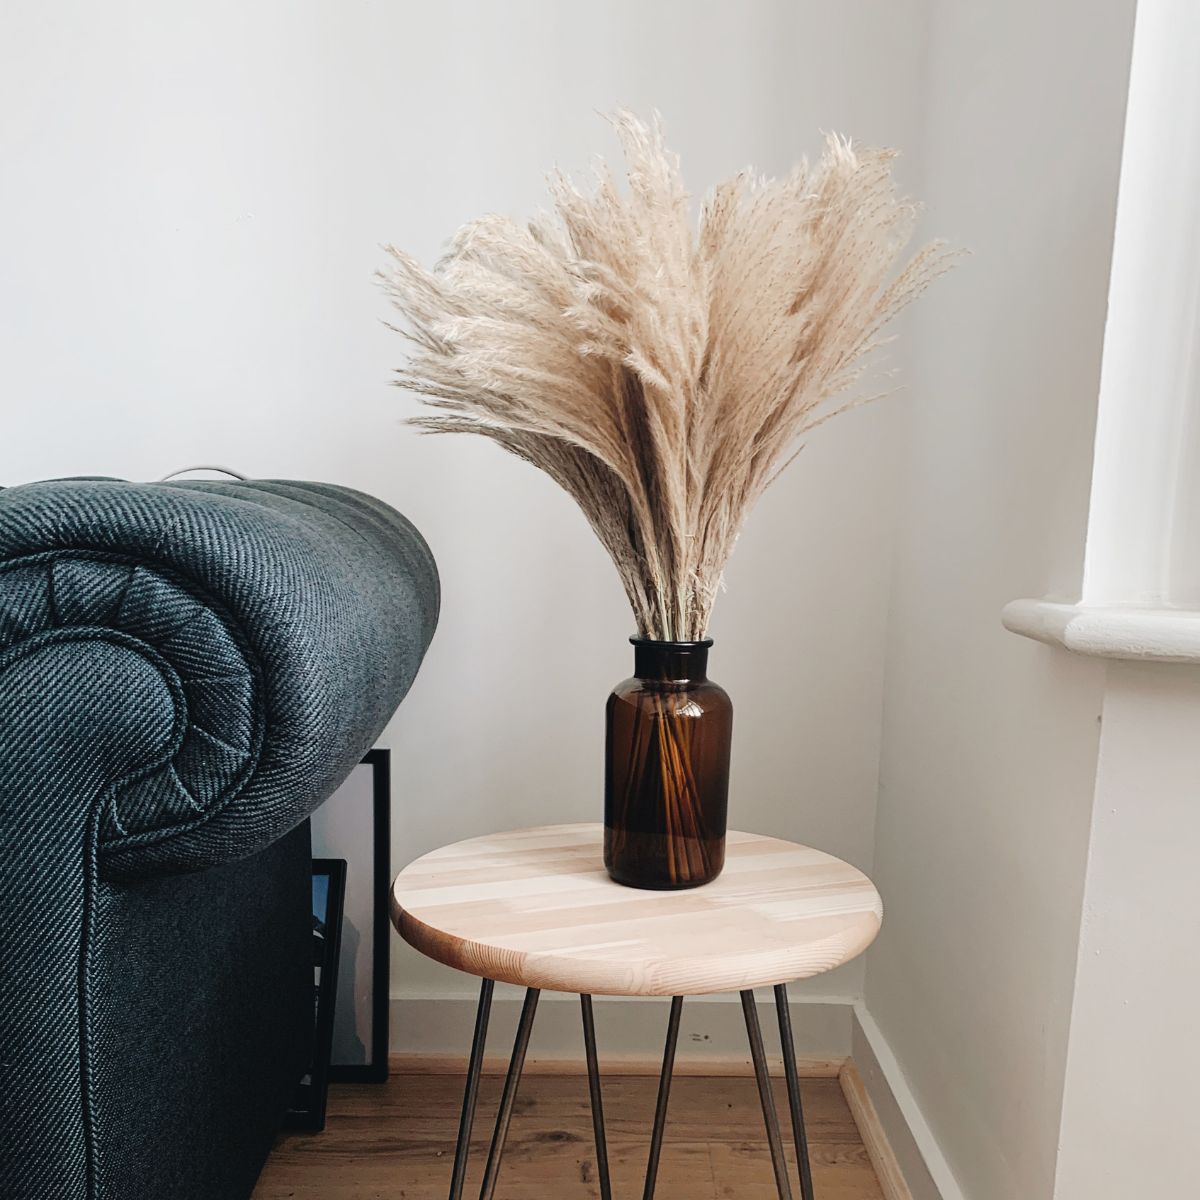 Pampas grass for interior decorations on Thursd 